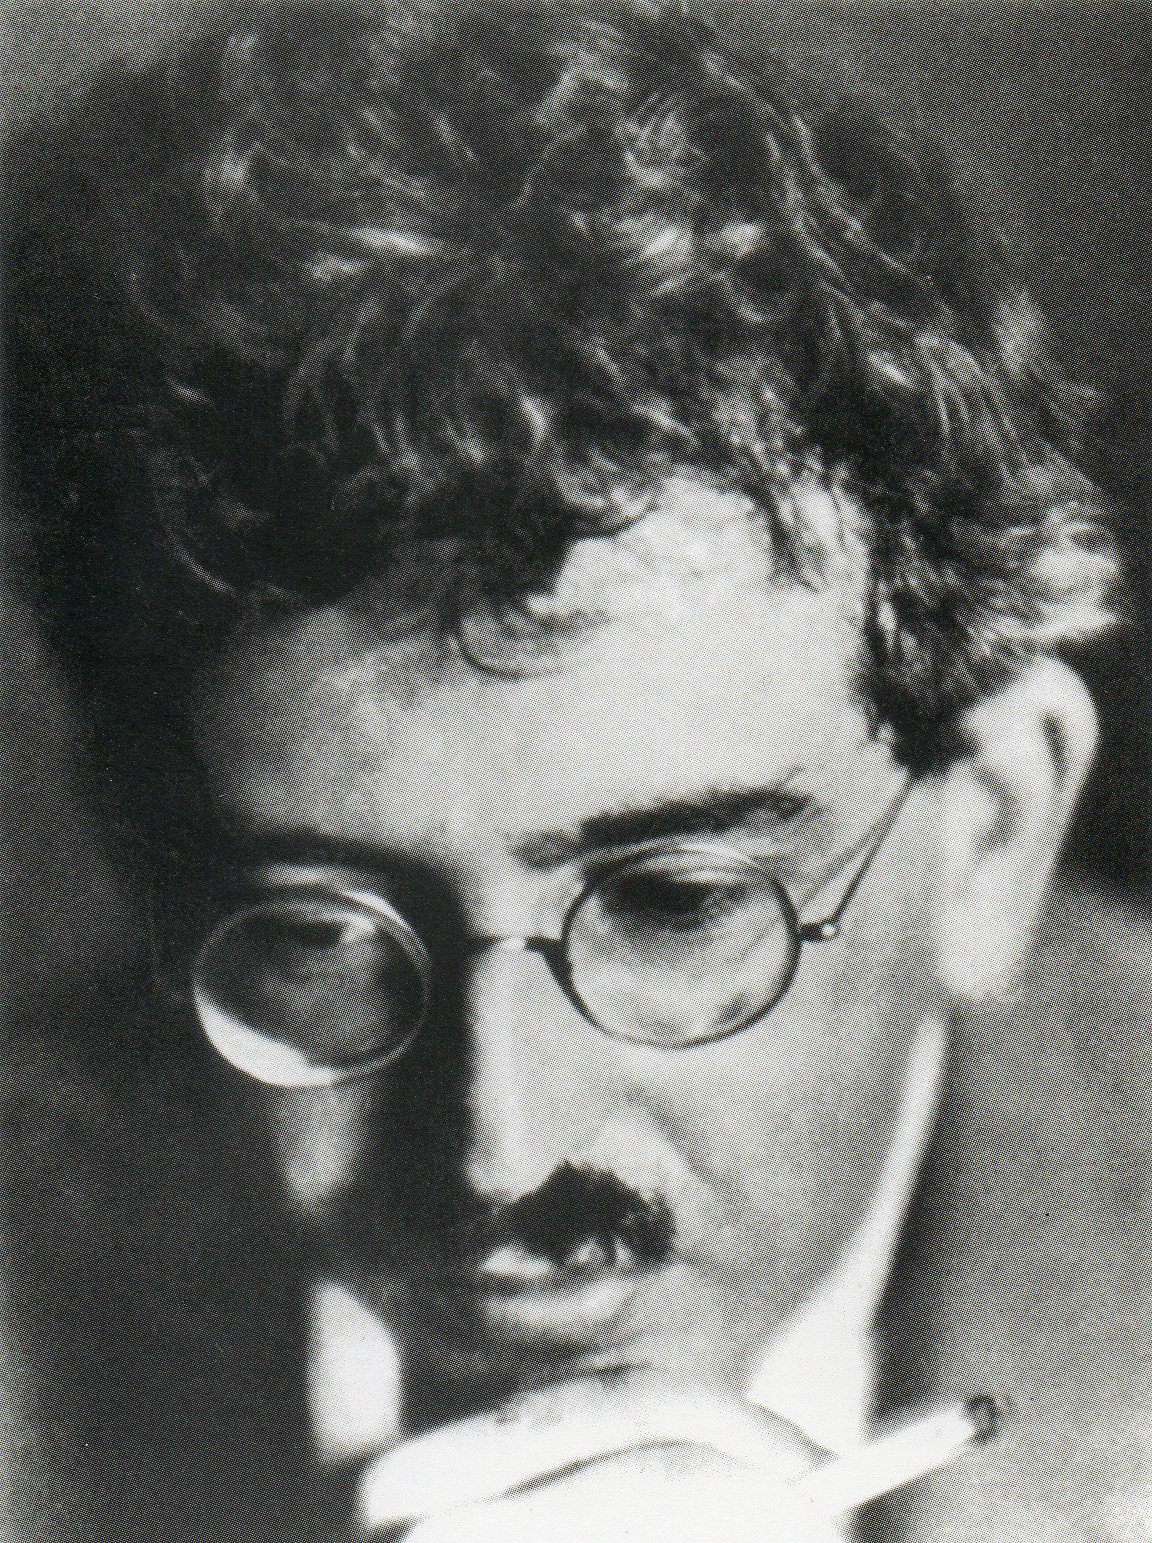 Walter Benjamin and the Unclaimed Present - The Critical Moment